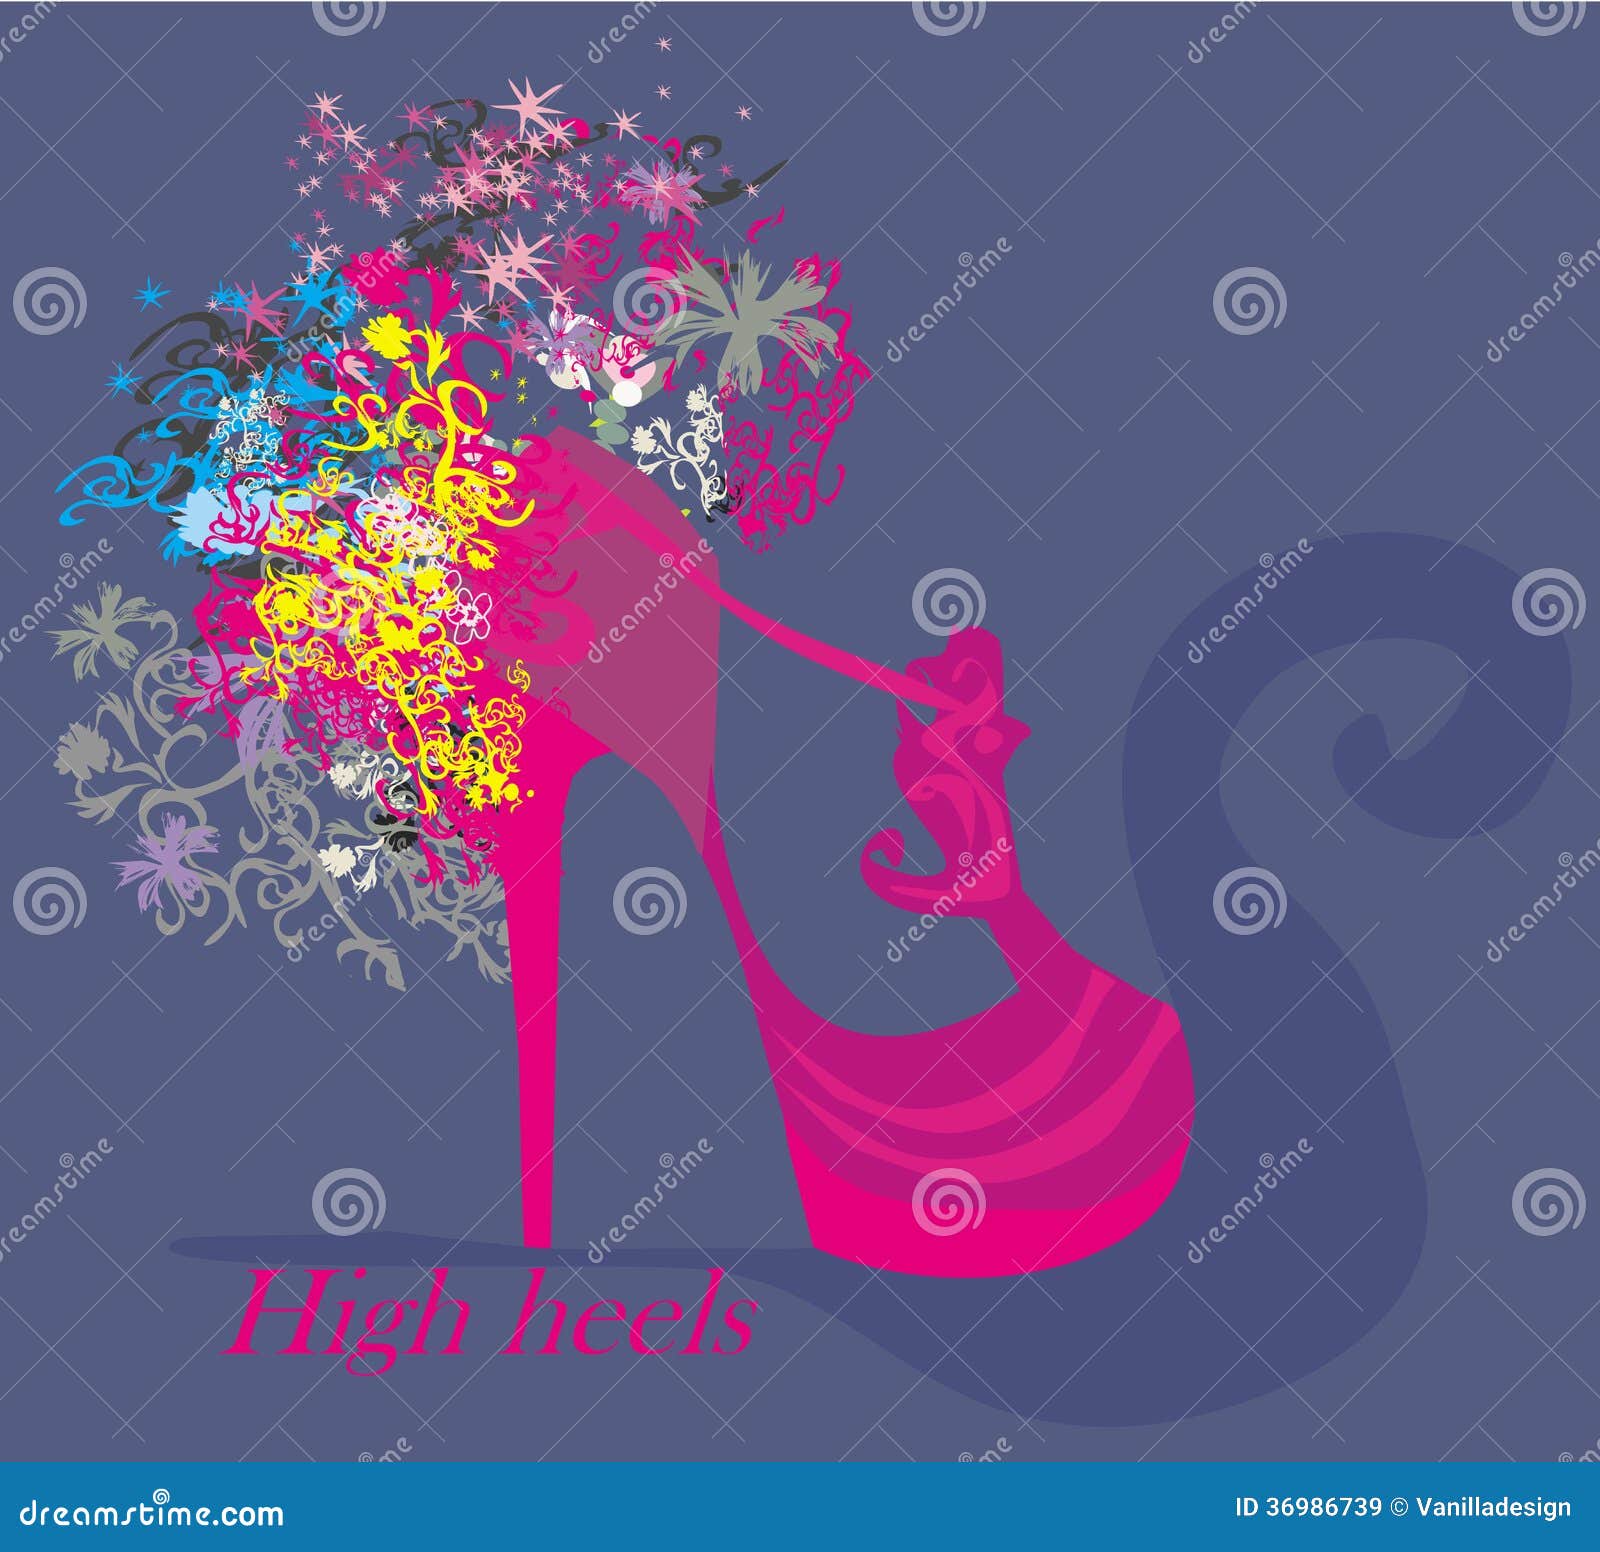 High Heels Background with Place for You Text Stock Vector ...